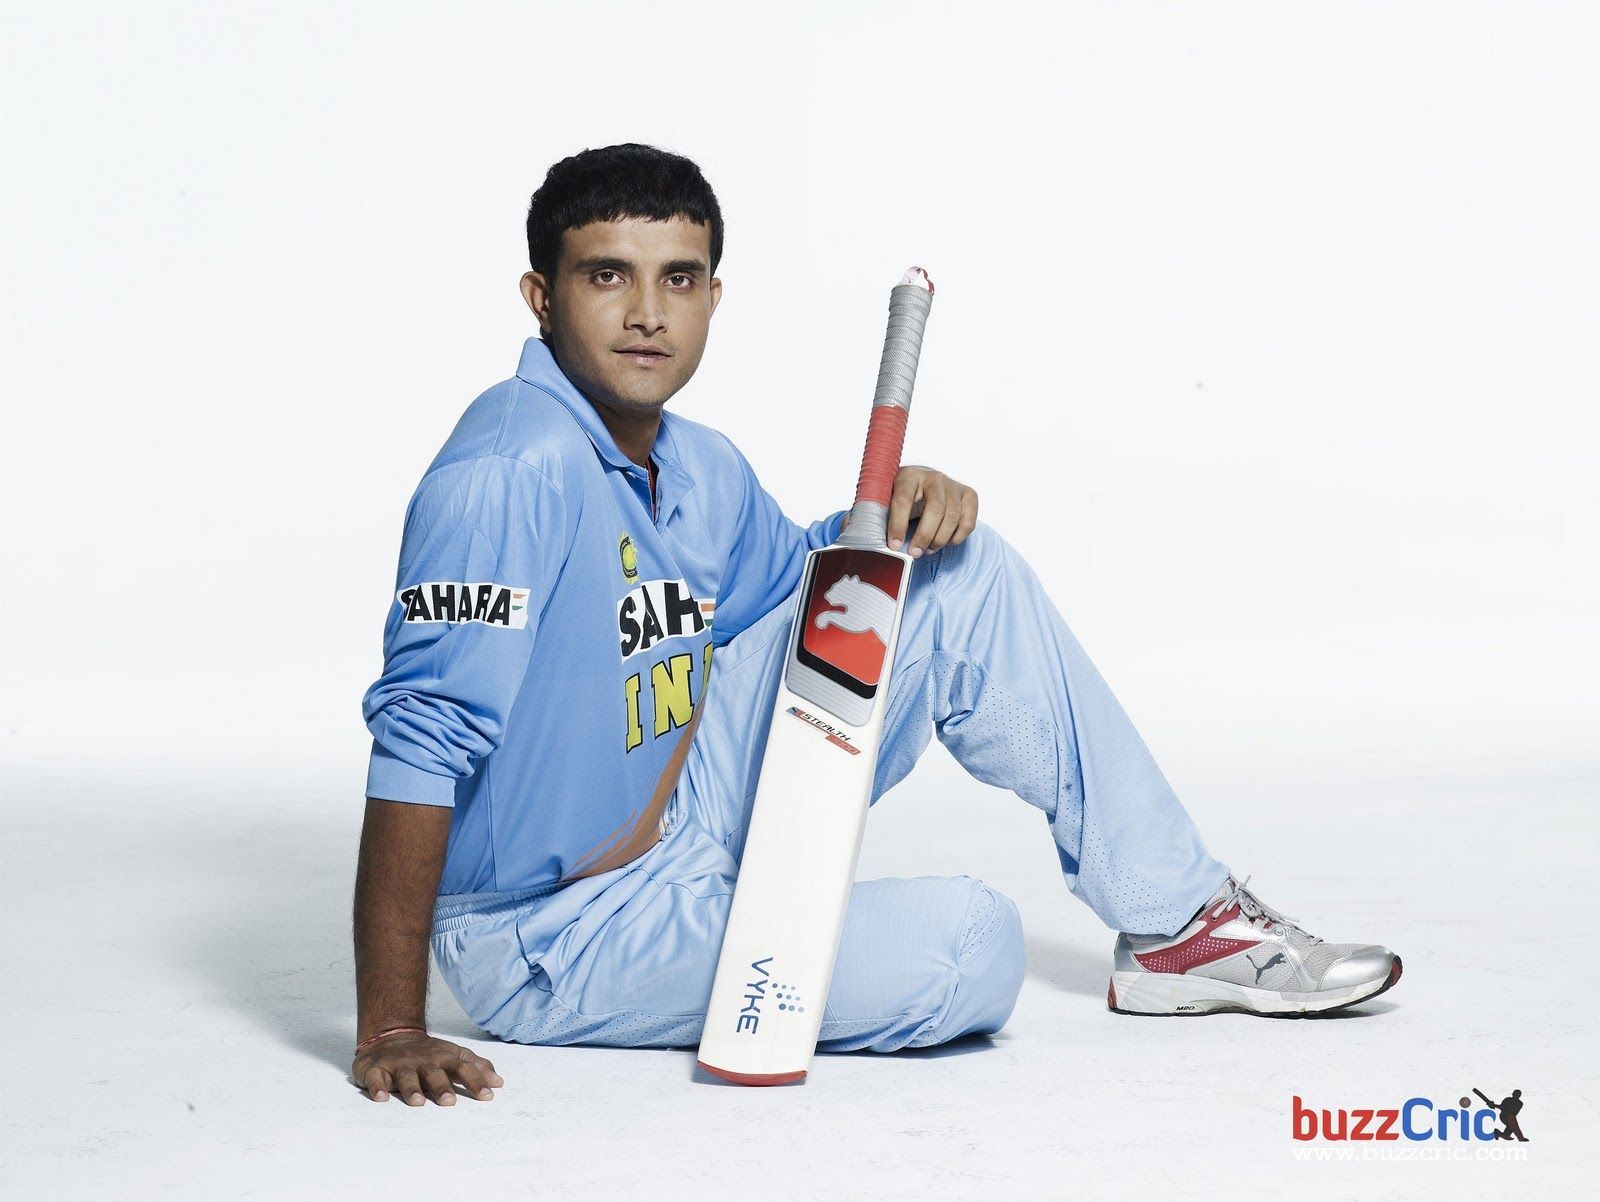 Sourav Ganguly: HD WALLPAPERS. Today in history, Monthly